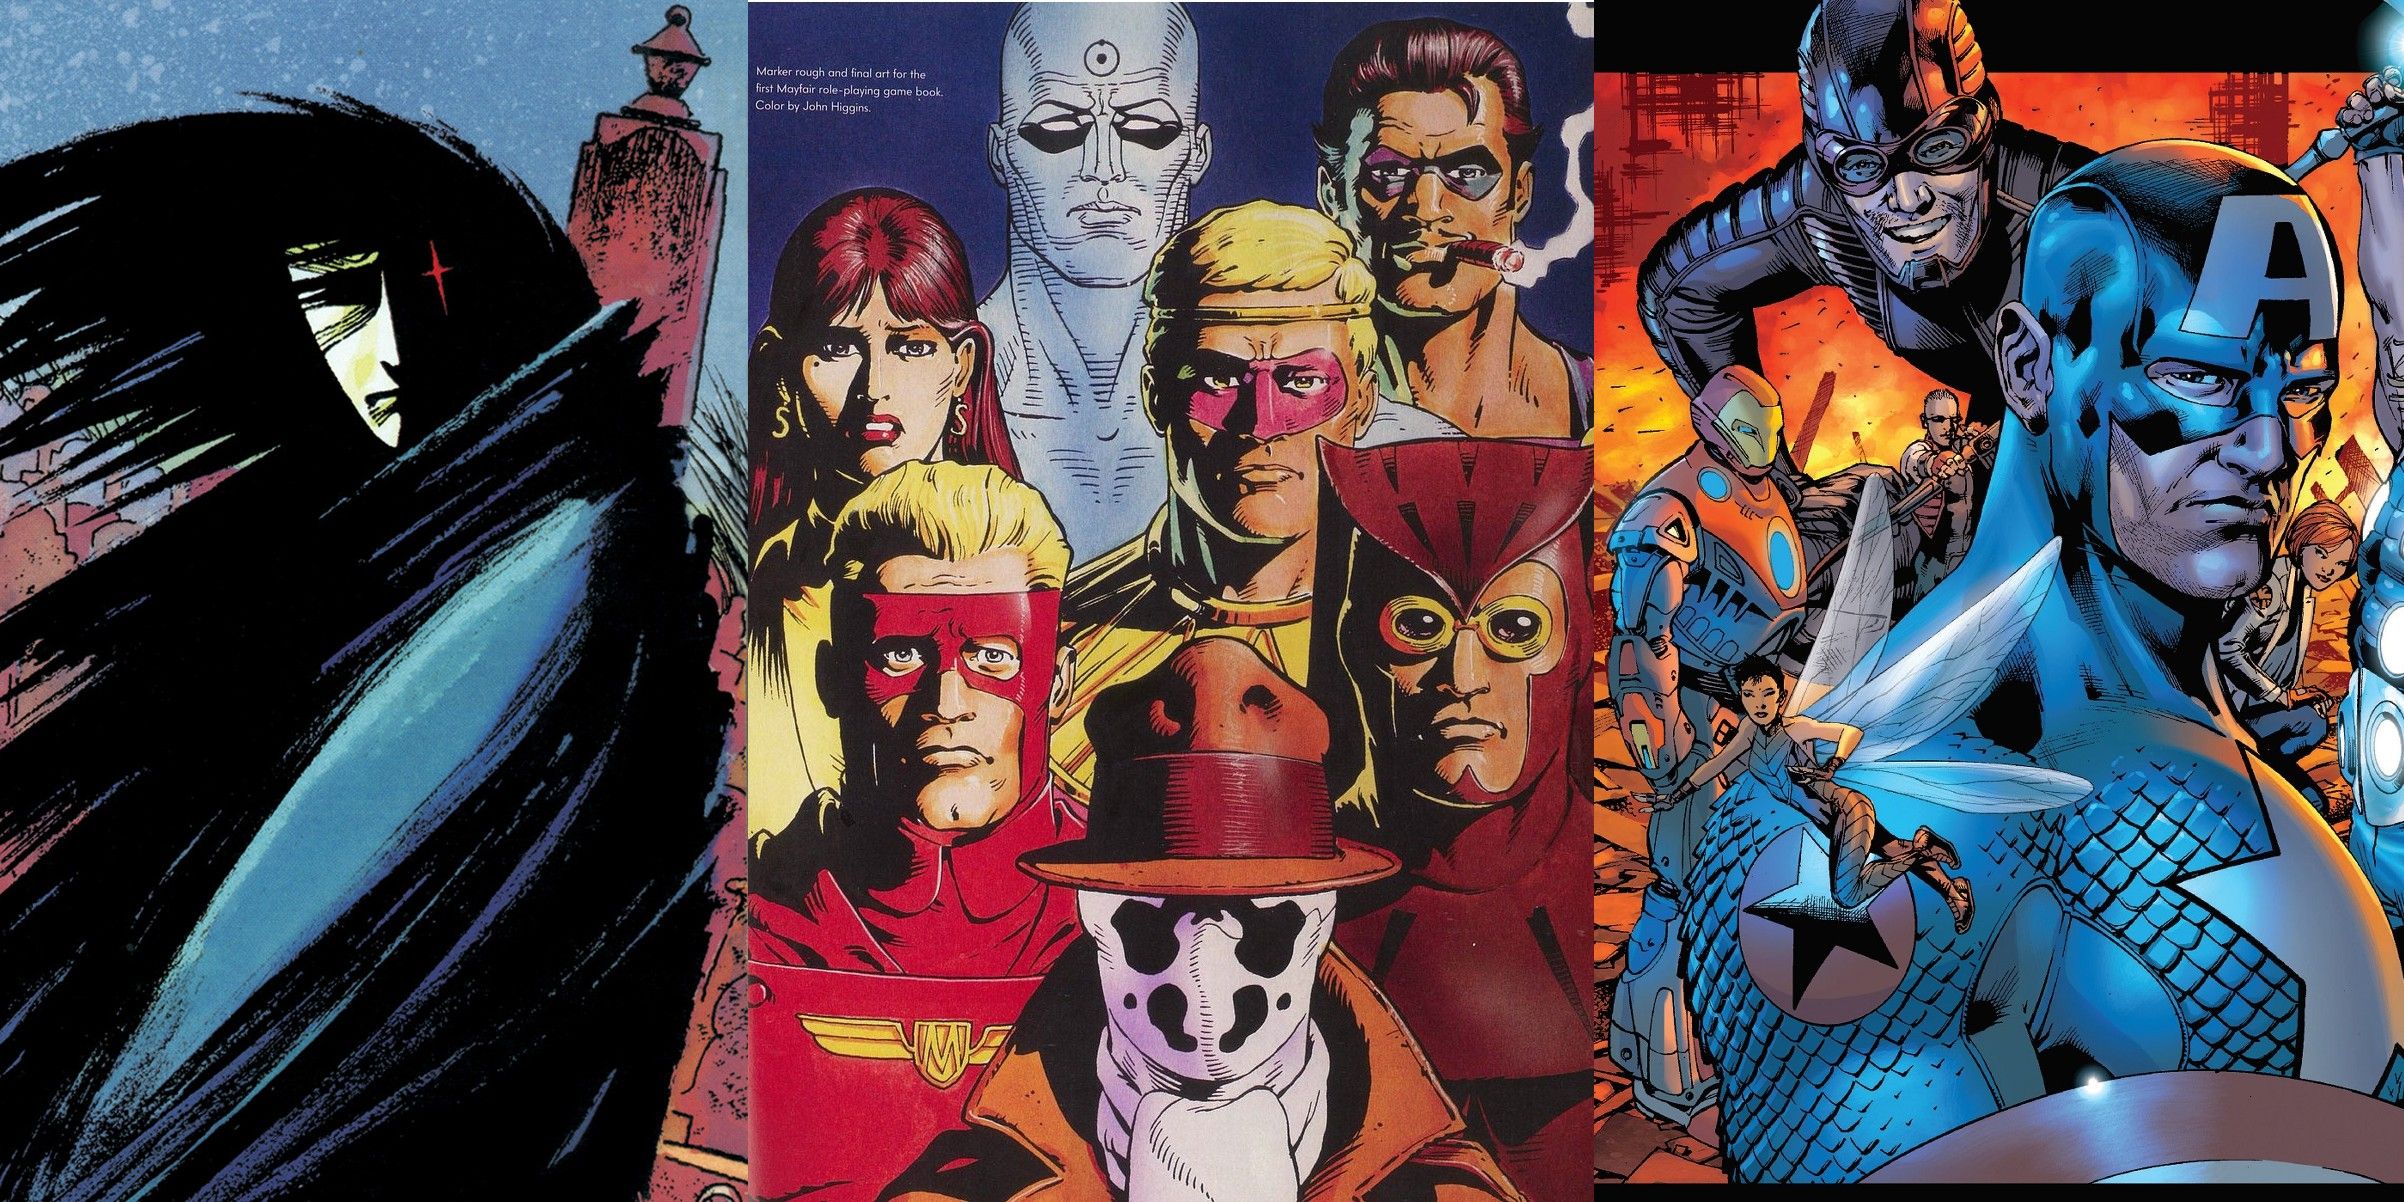 The 10 Most Influential Comics of All Time